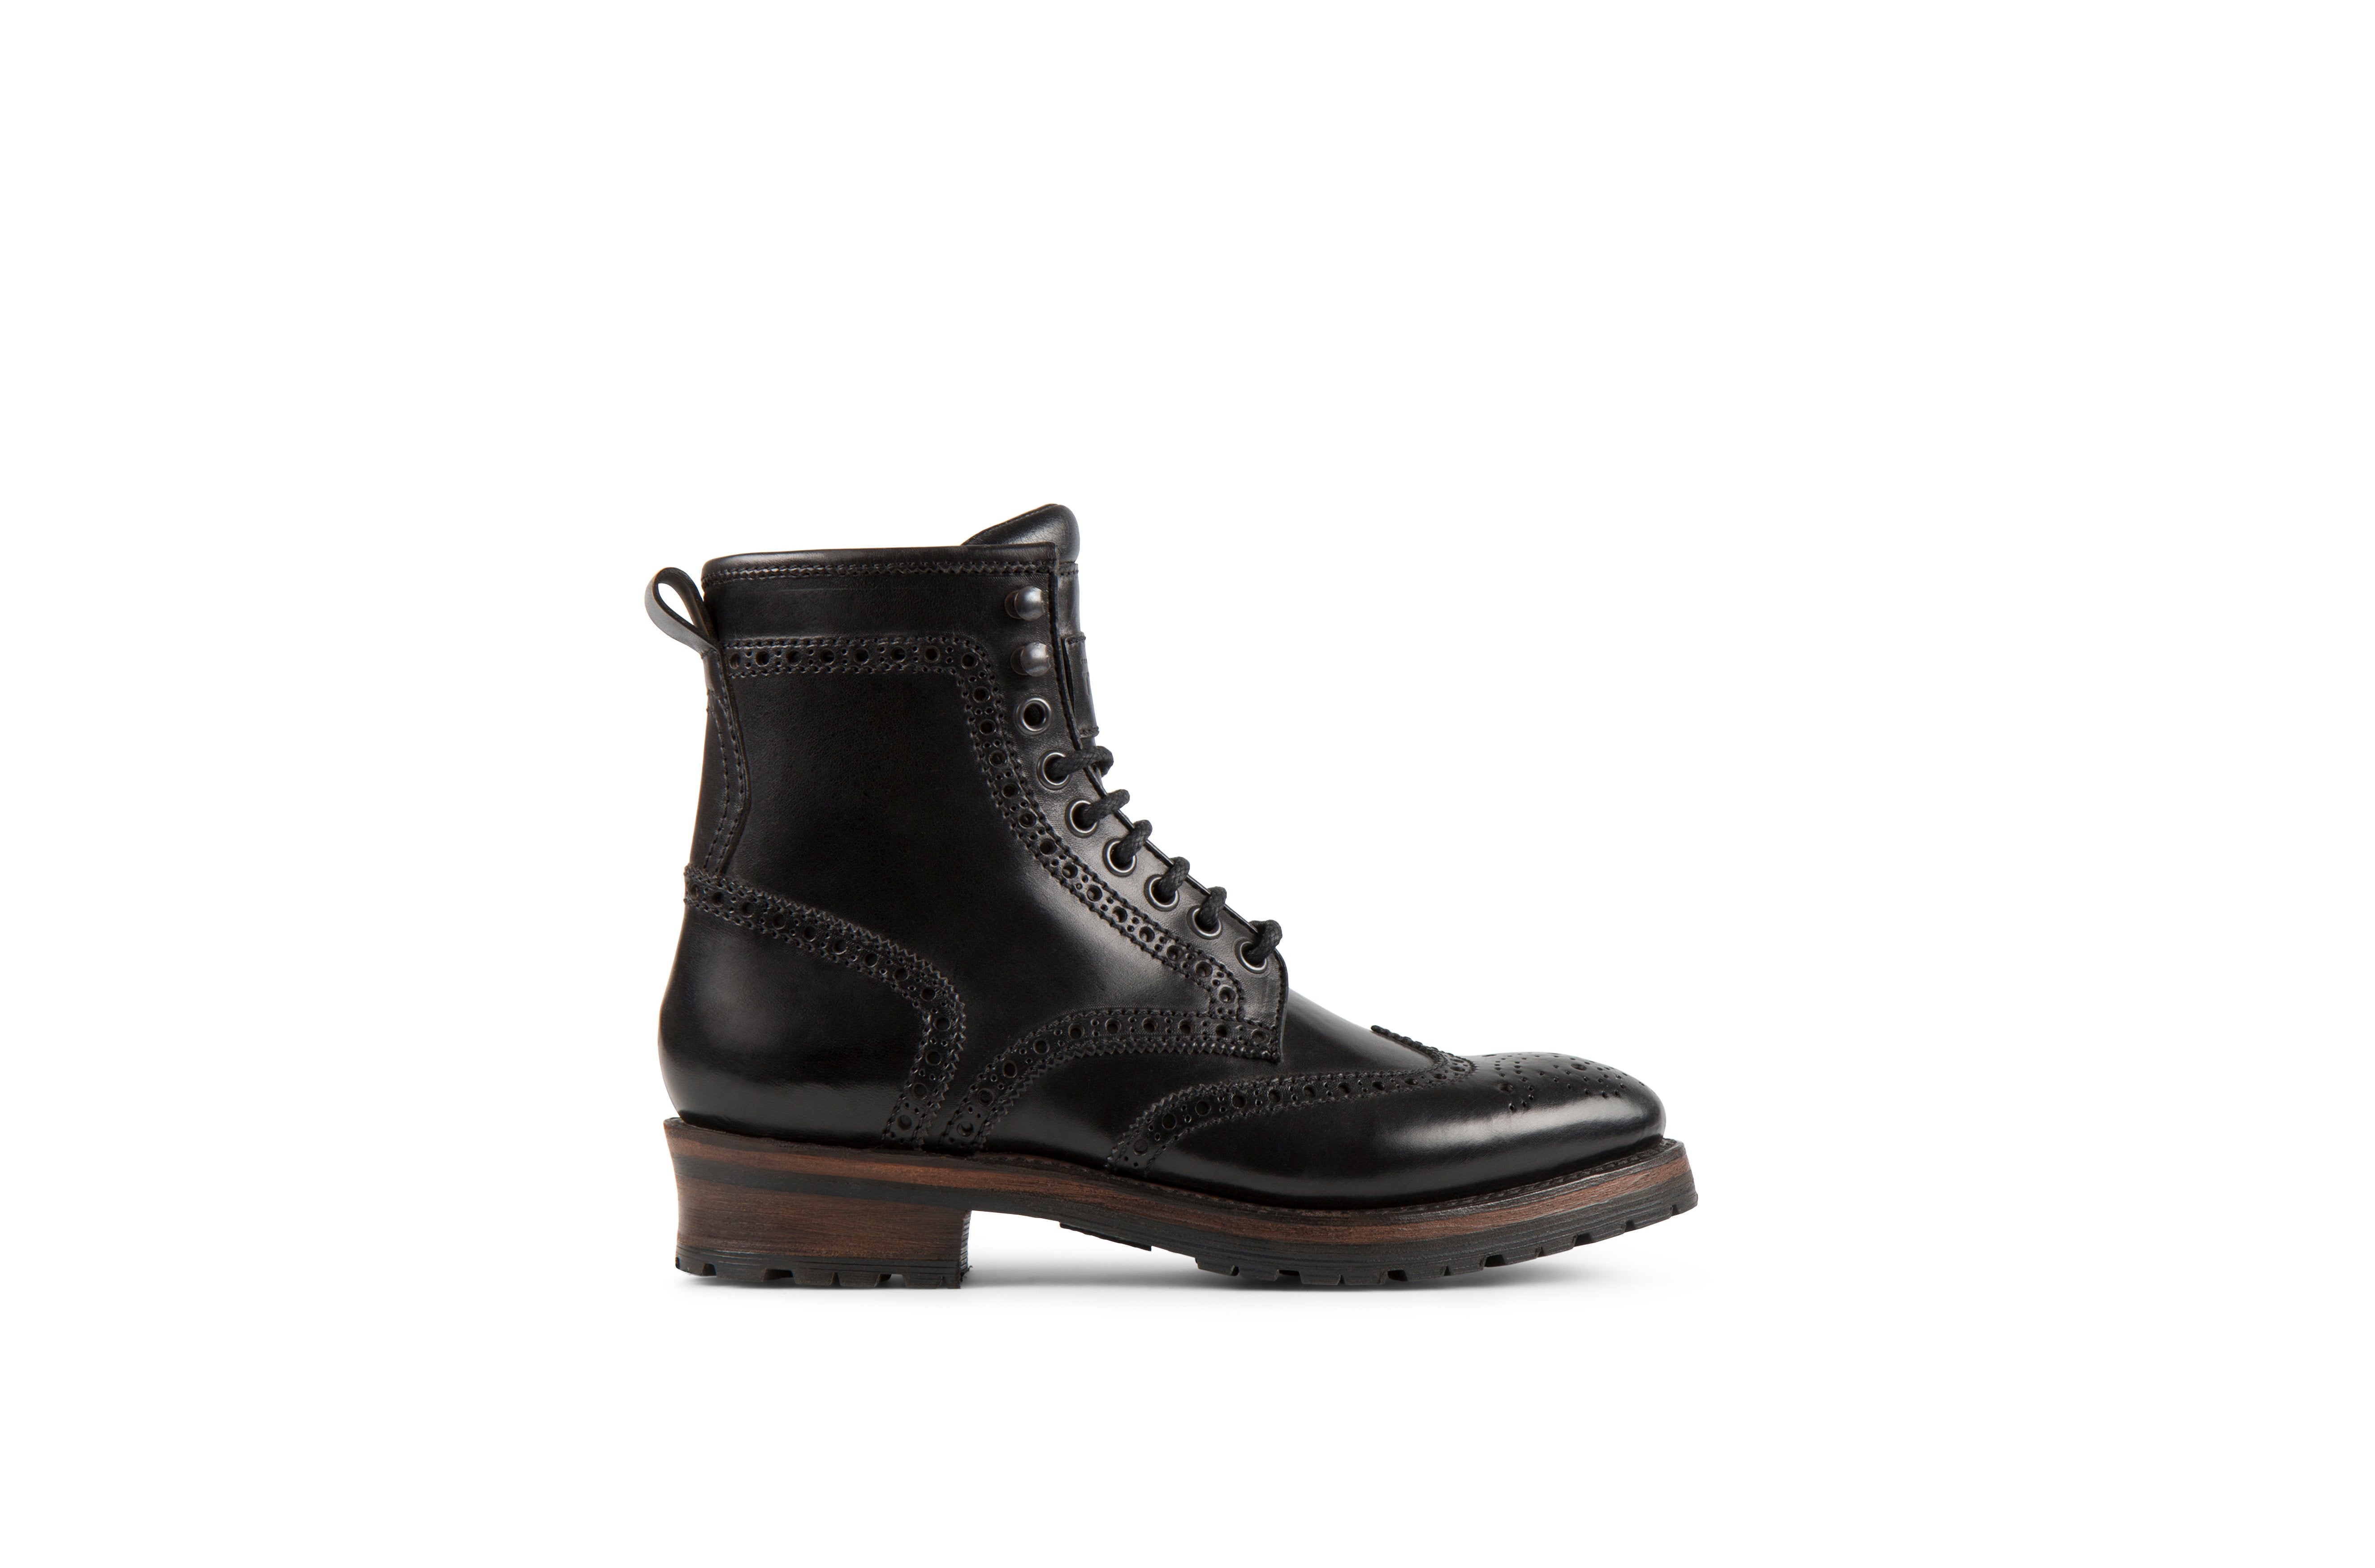 Baltimore Black Cordovan Leather Logger Boots – Project TWLV